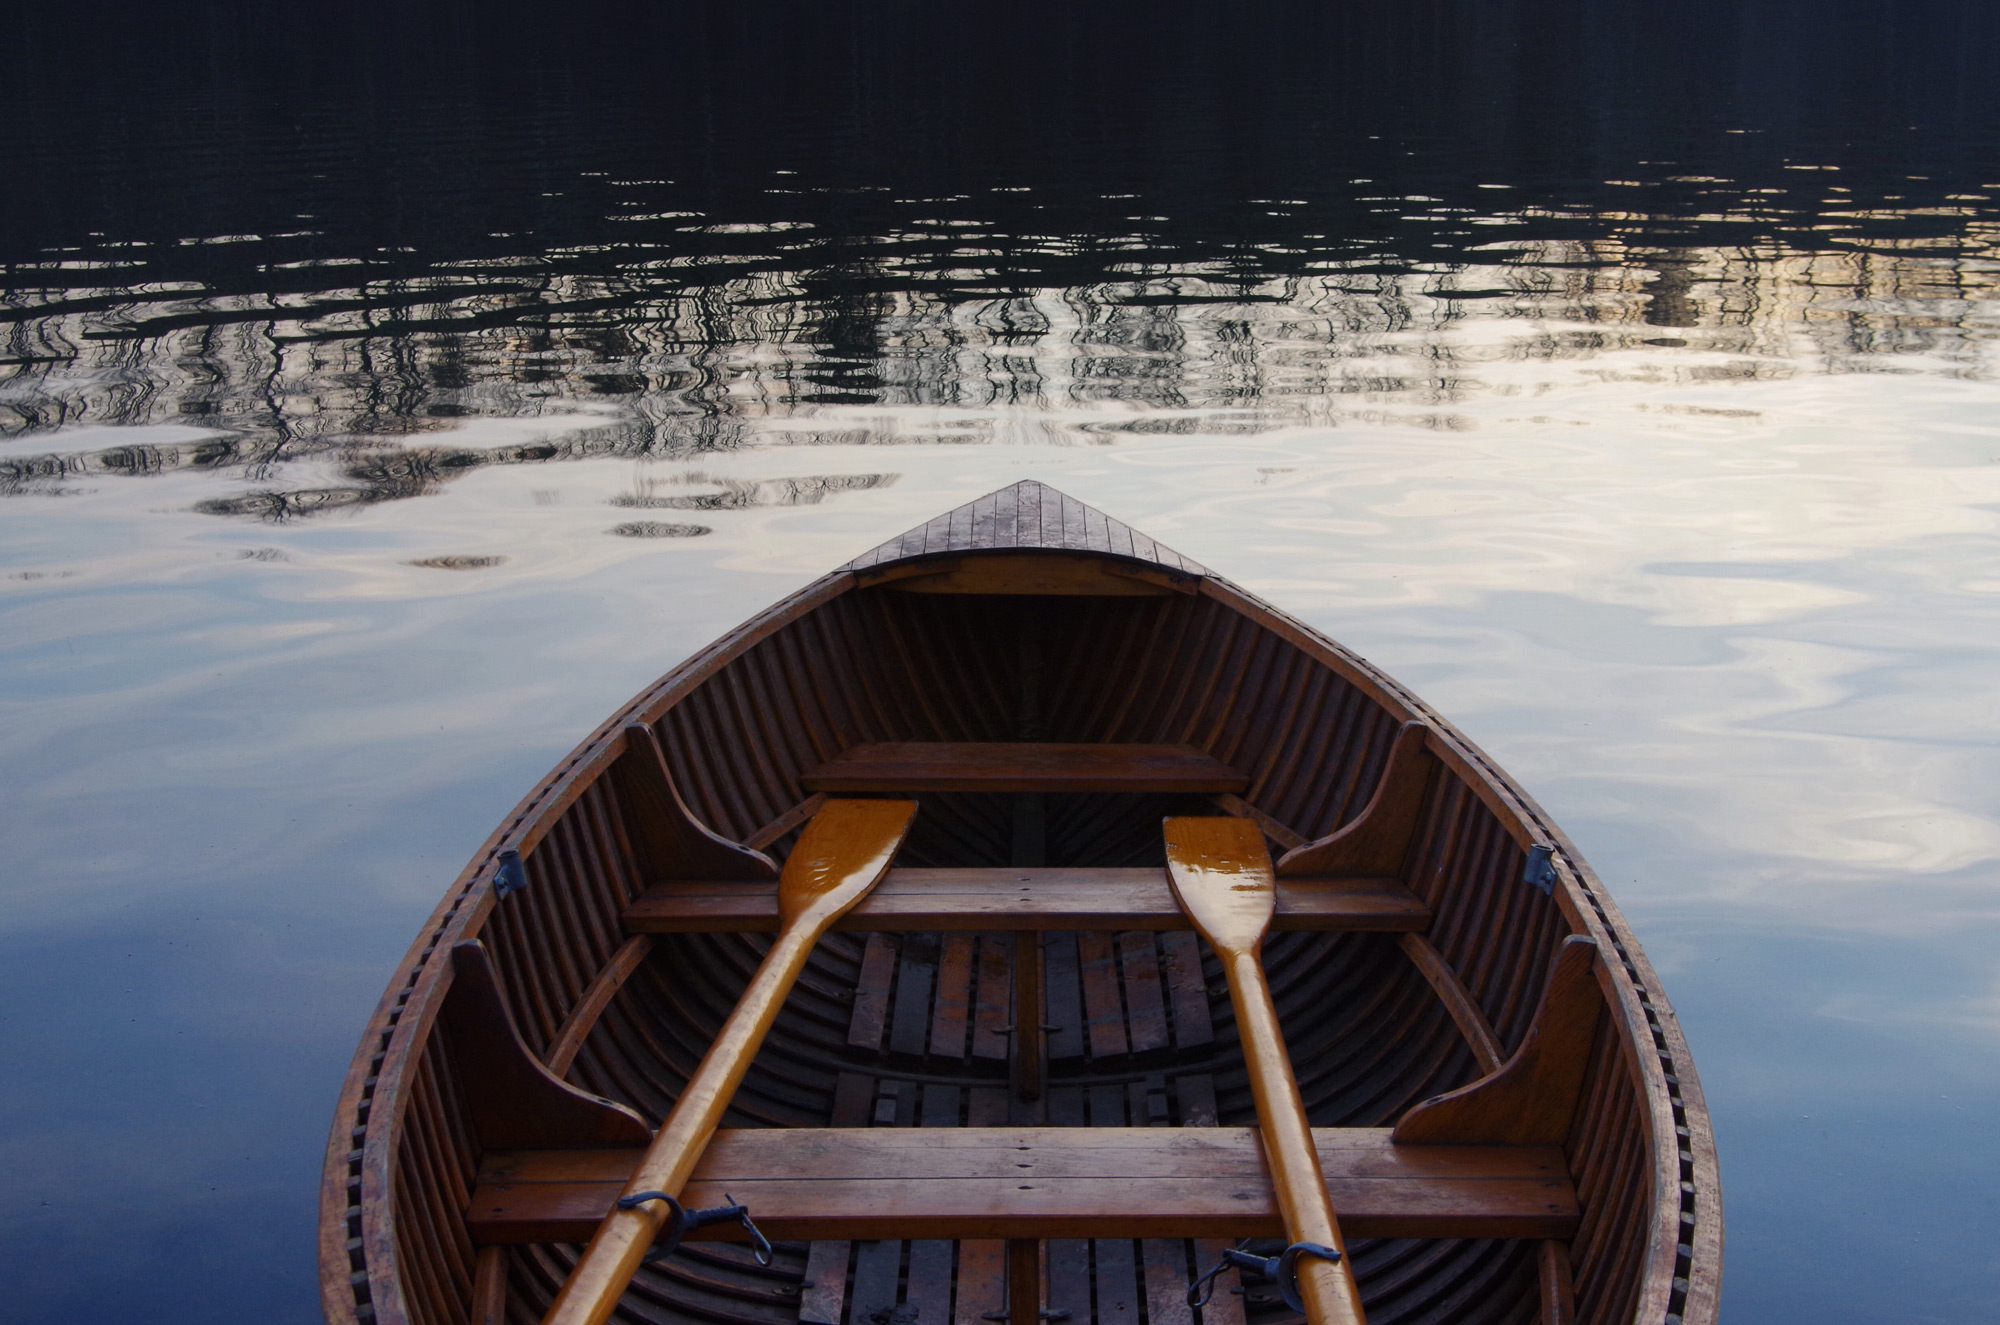 A rowing boat and oars on a lake with the landscape reflecting on the water.